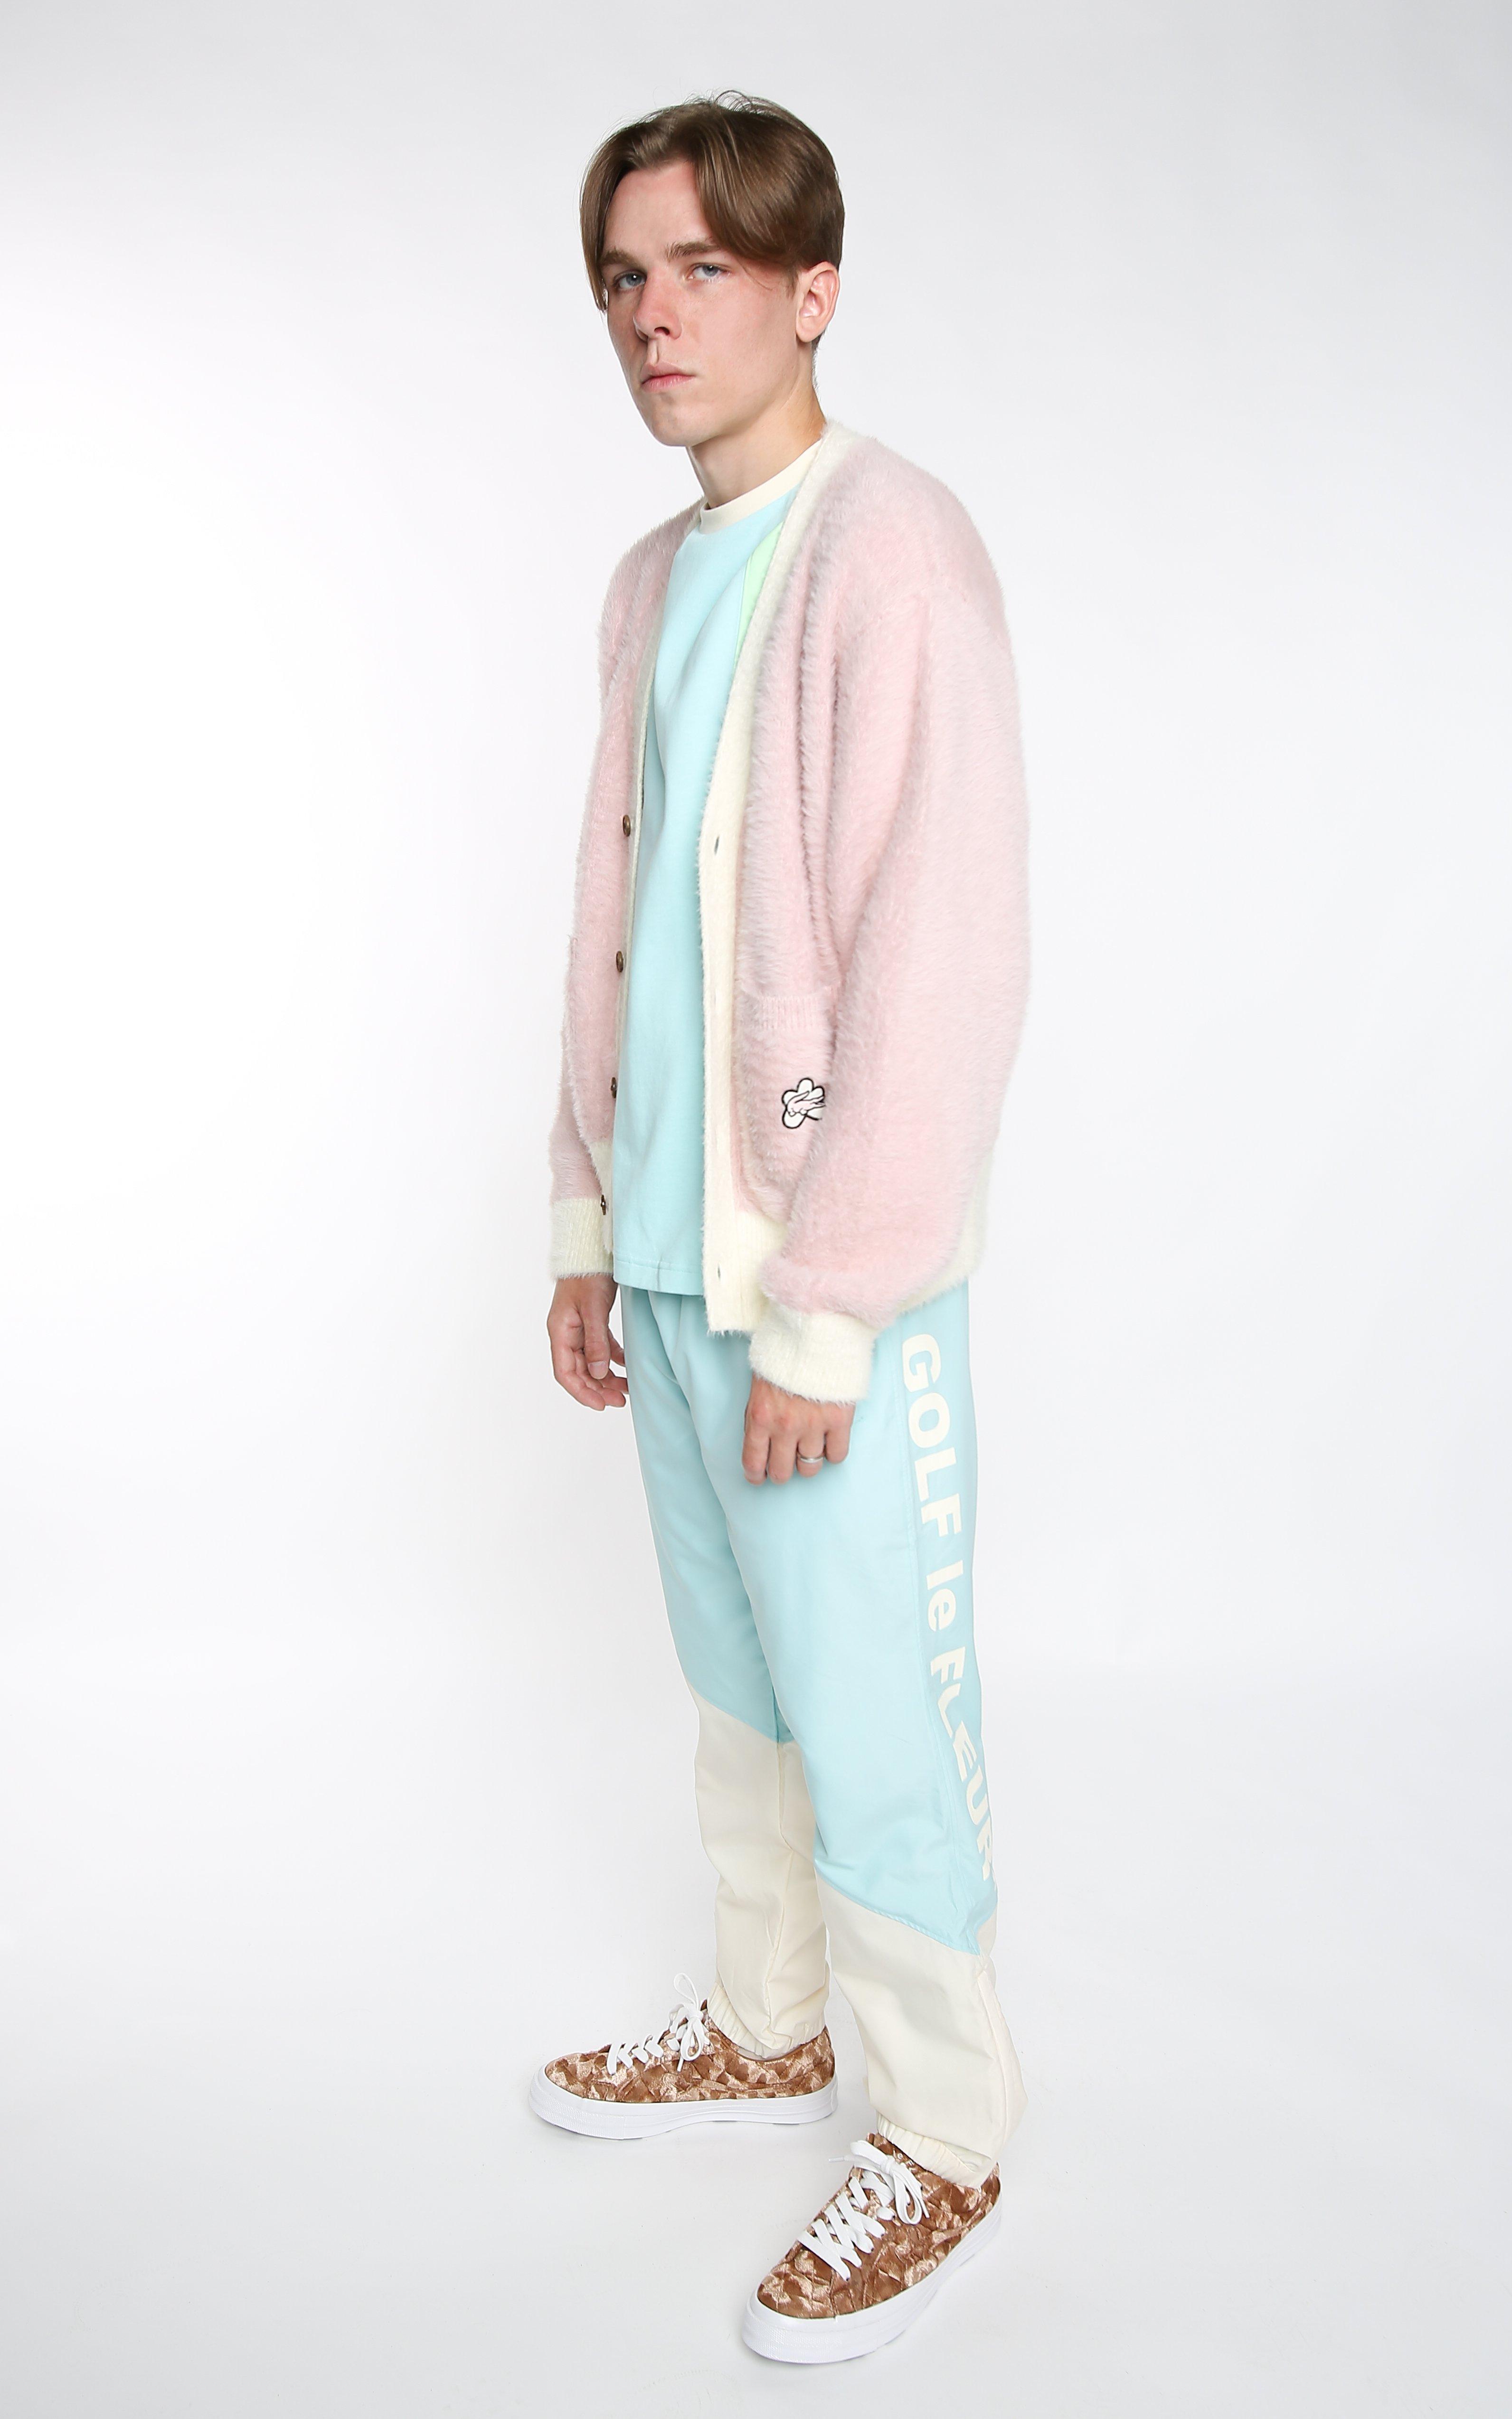 lacoste pink cardigan